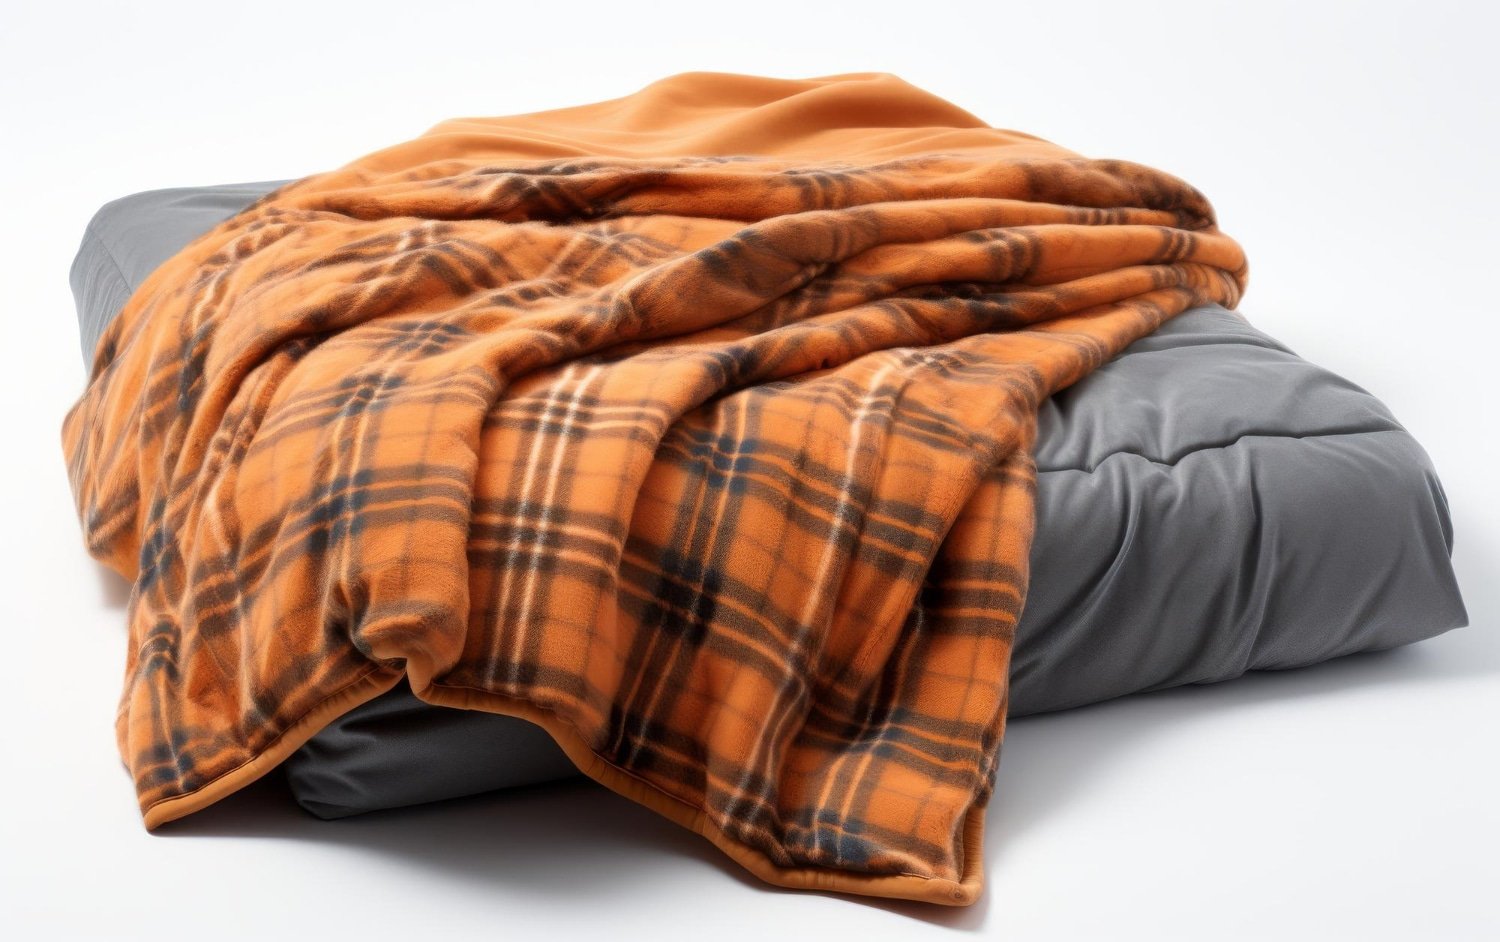 Bearaby: The Weighted Blanket for Natural, Restful Sleep